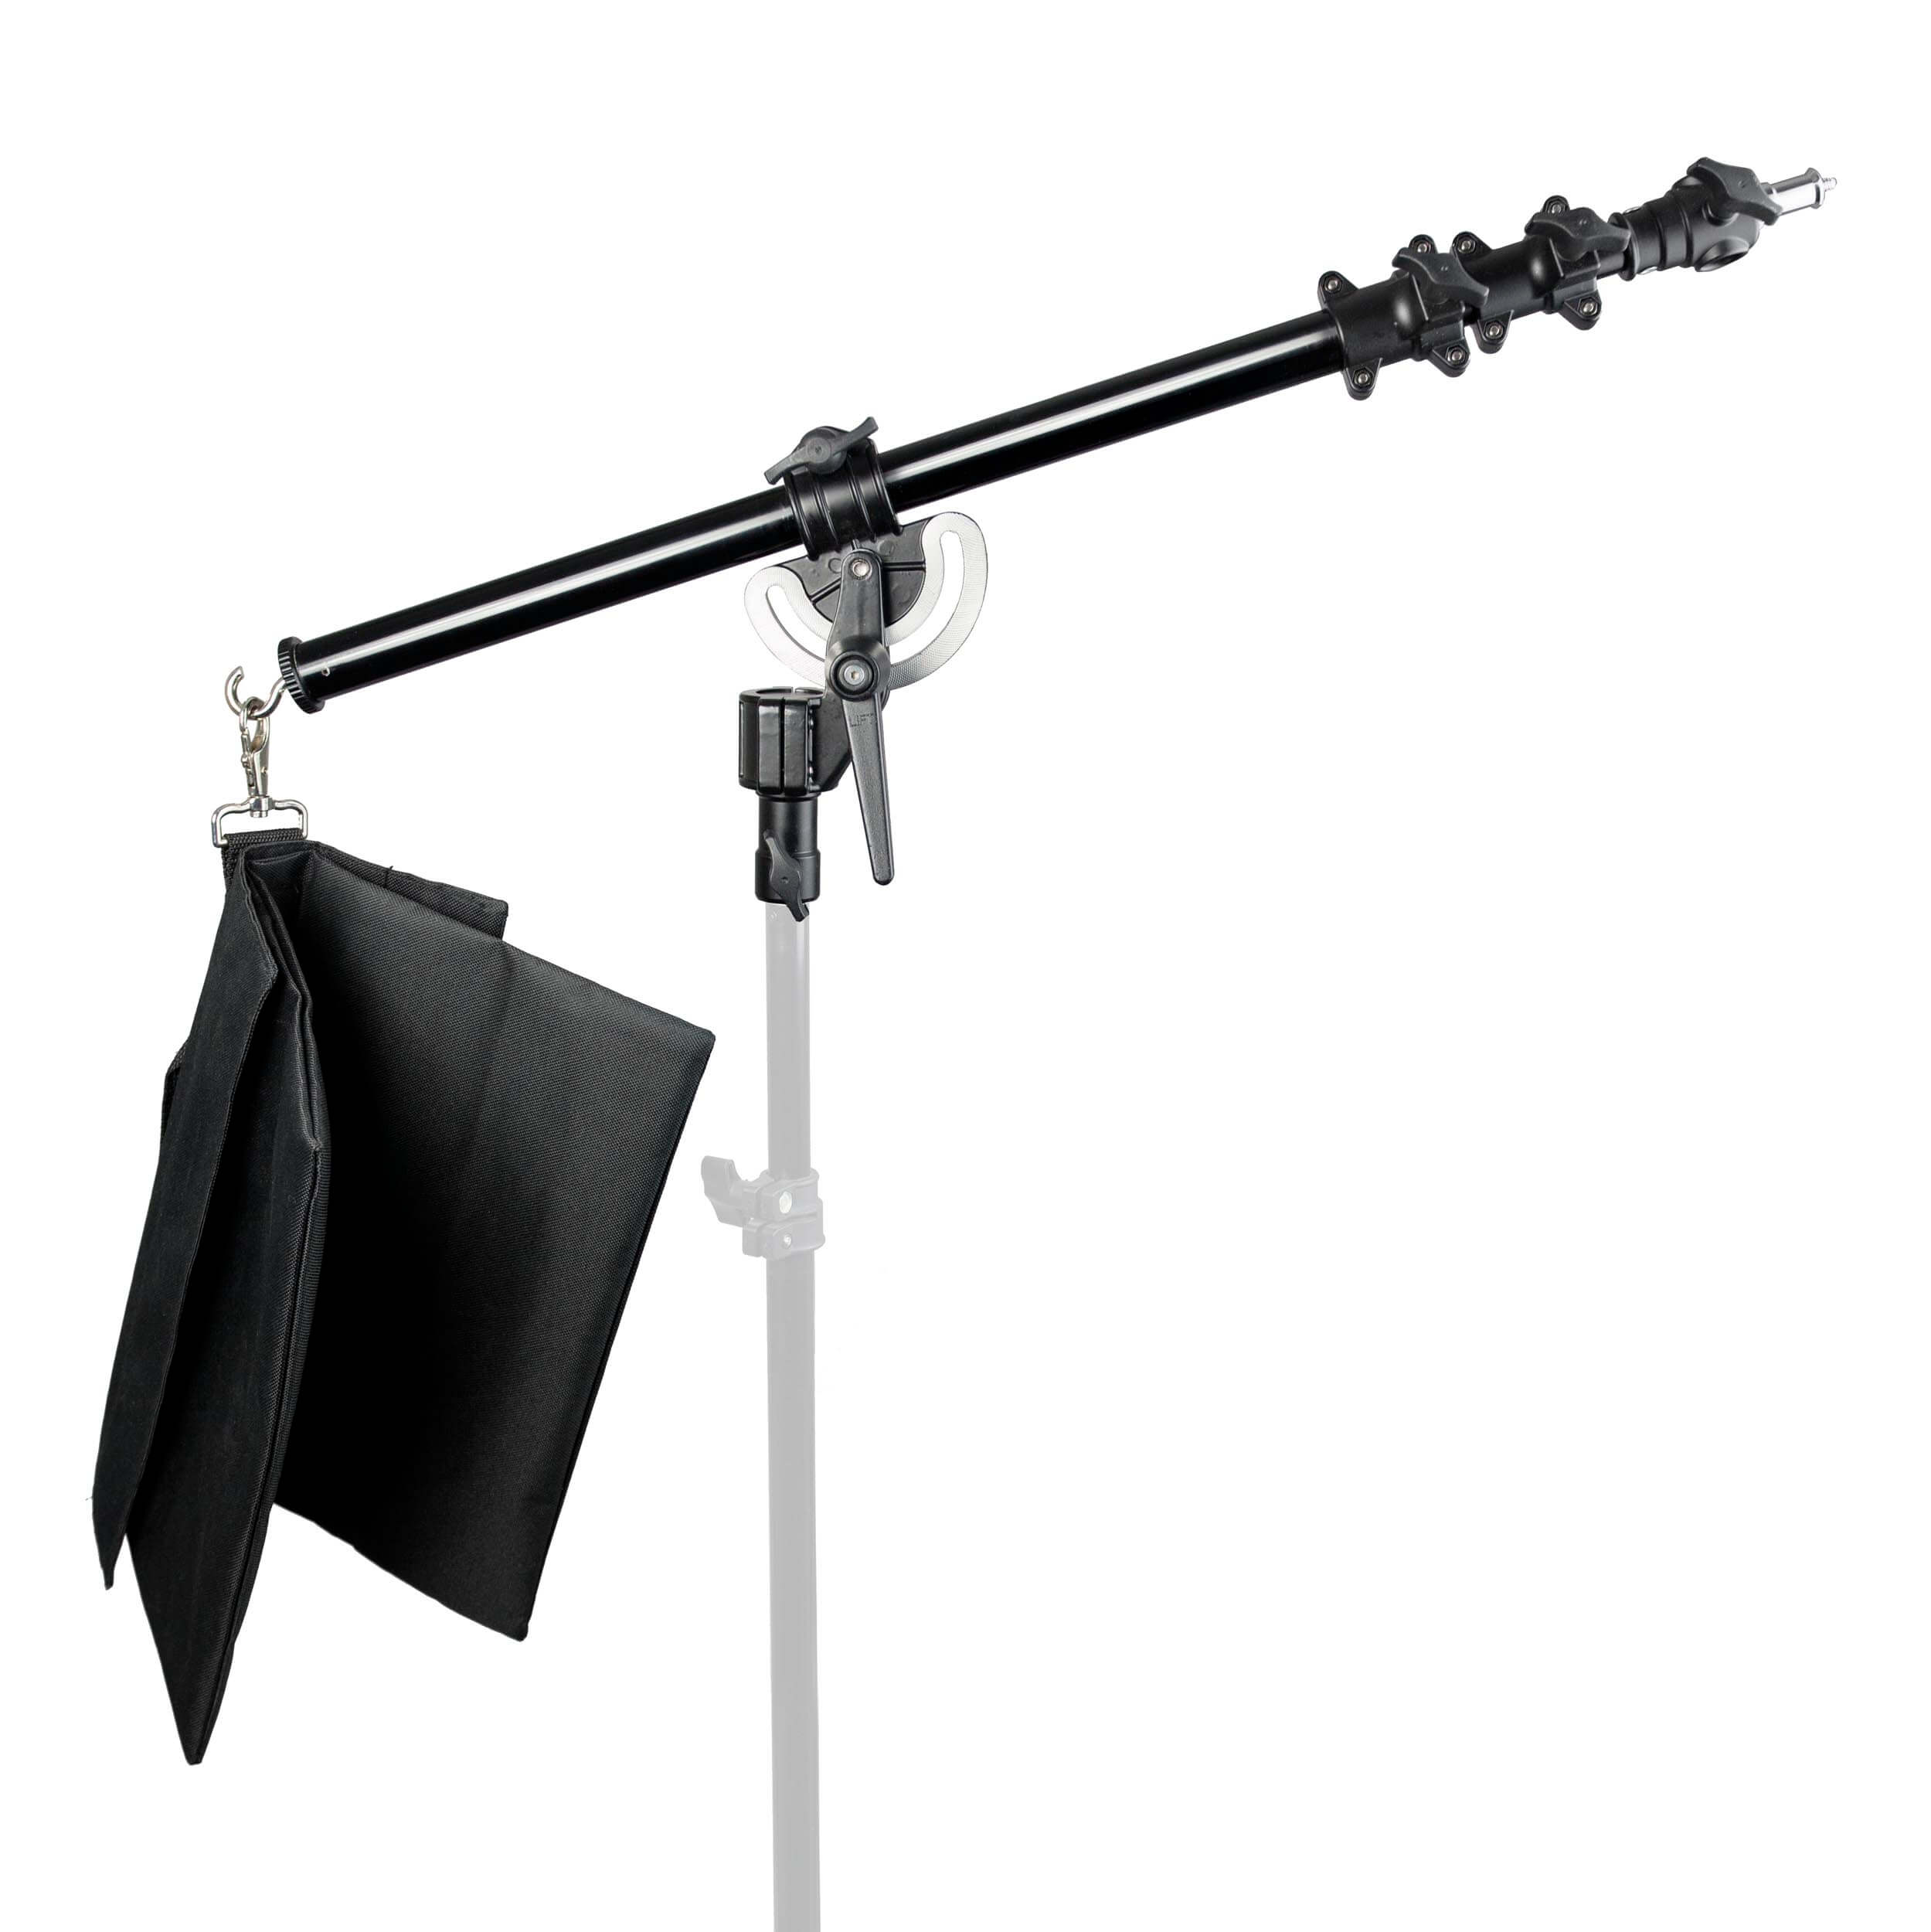 160cm Metal Hinge Mini Boom Arm and Weight Bag By PixaPro 